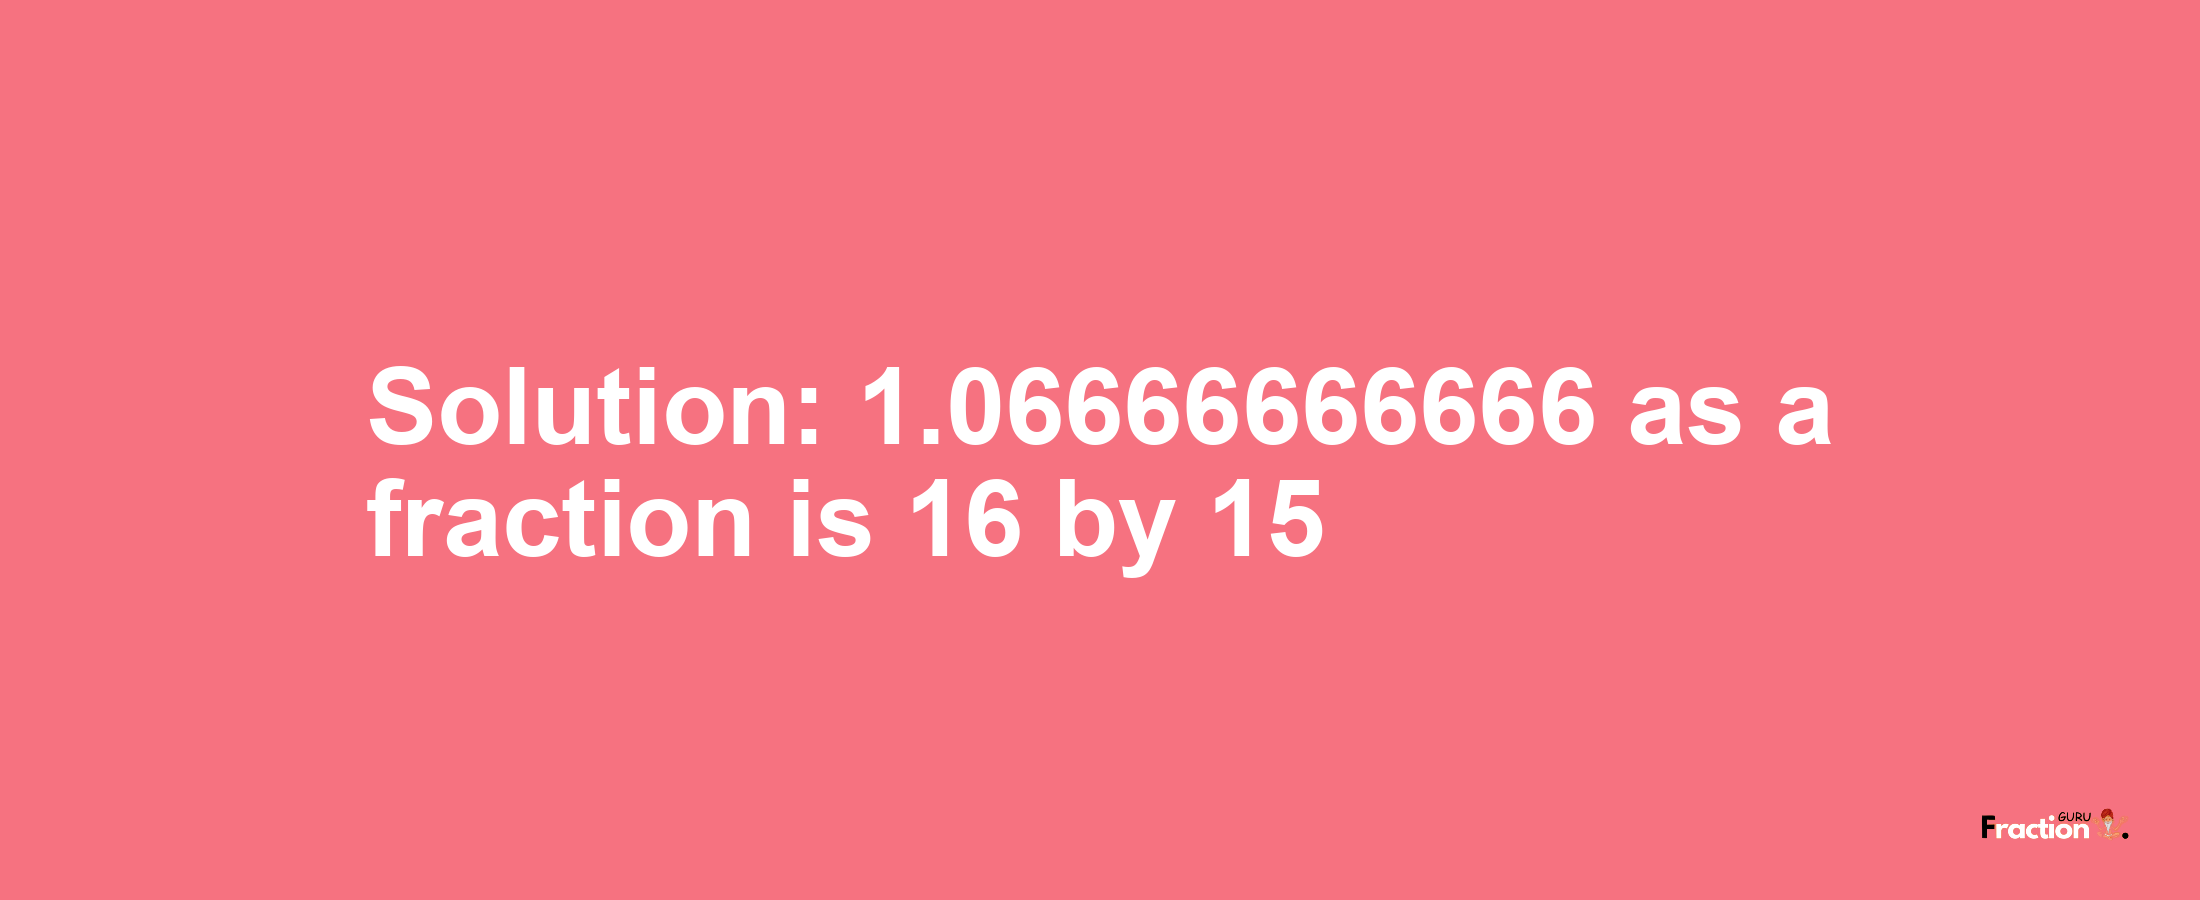 Solution:1.06666666666 as a fraction is 16/15